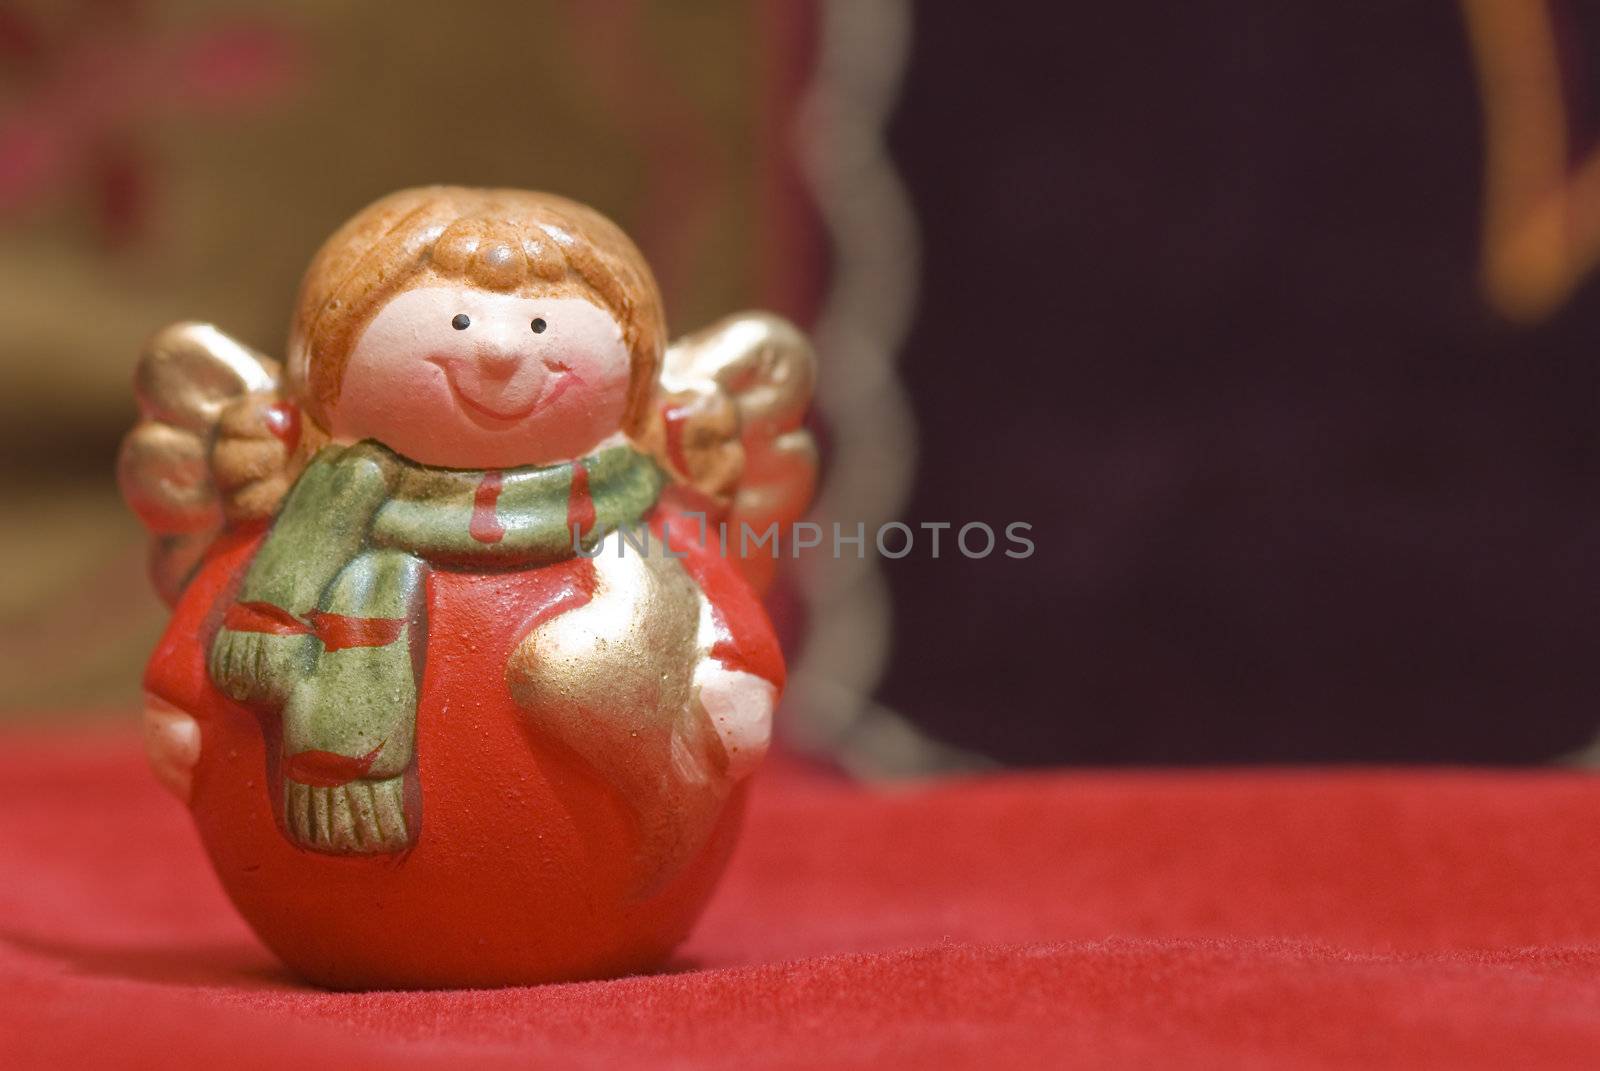  smiling angel figurine Christmas by Carche